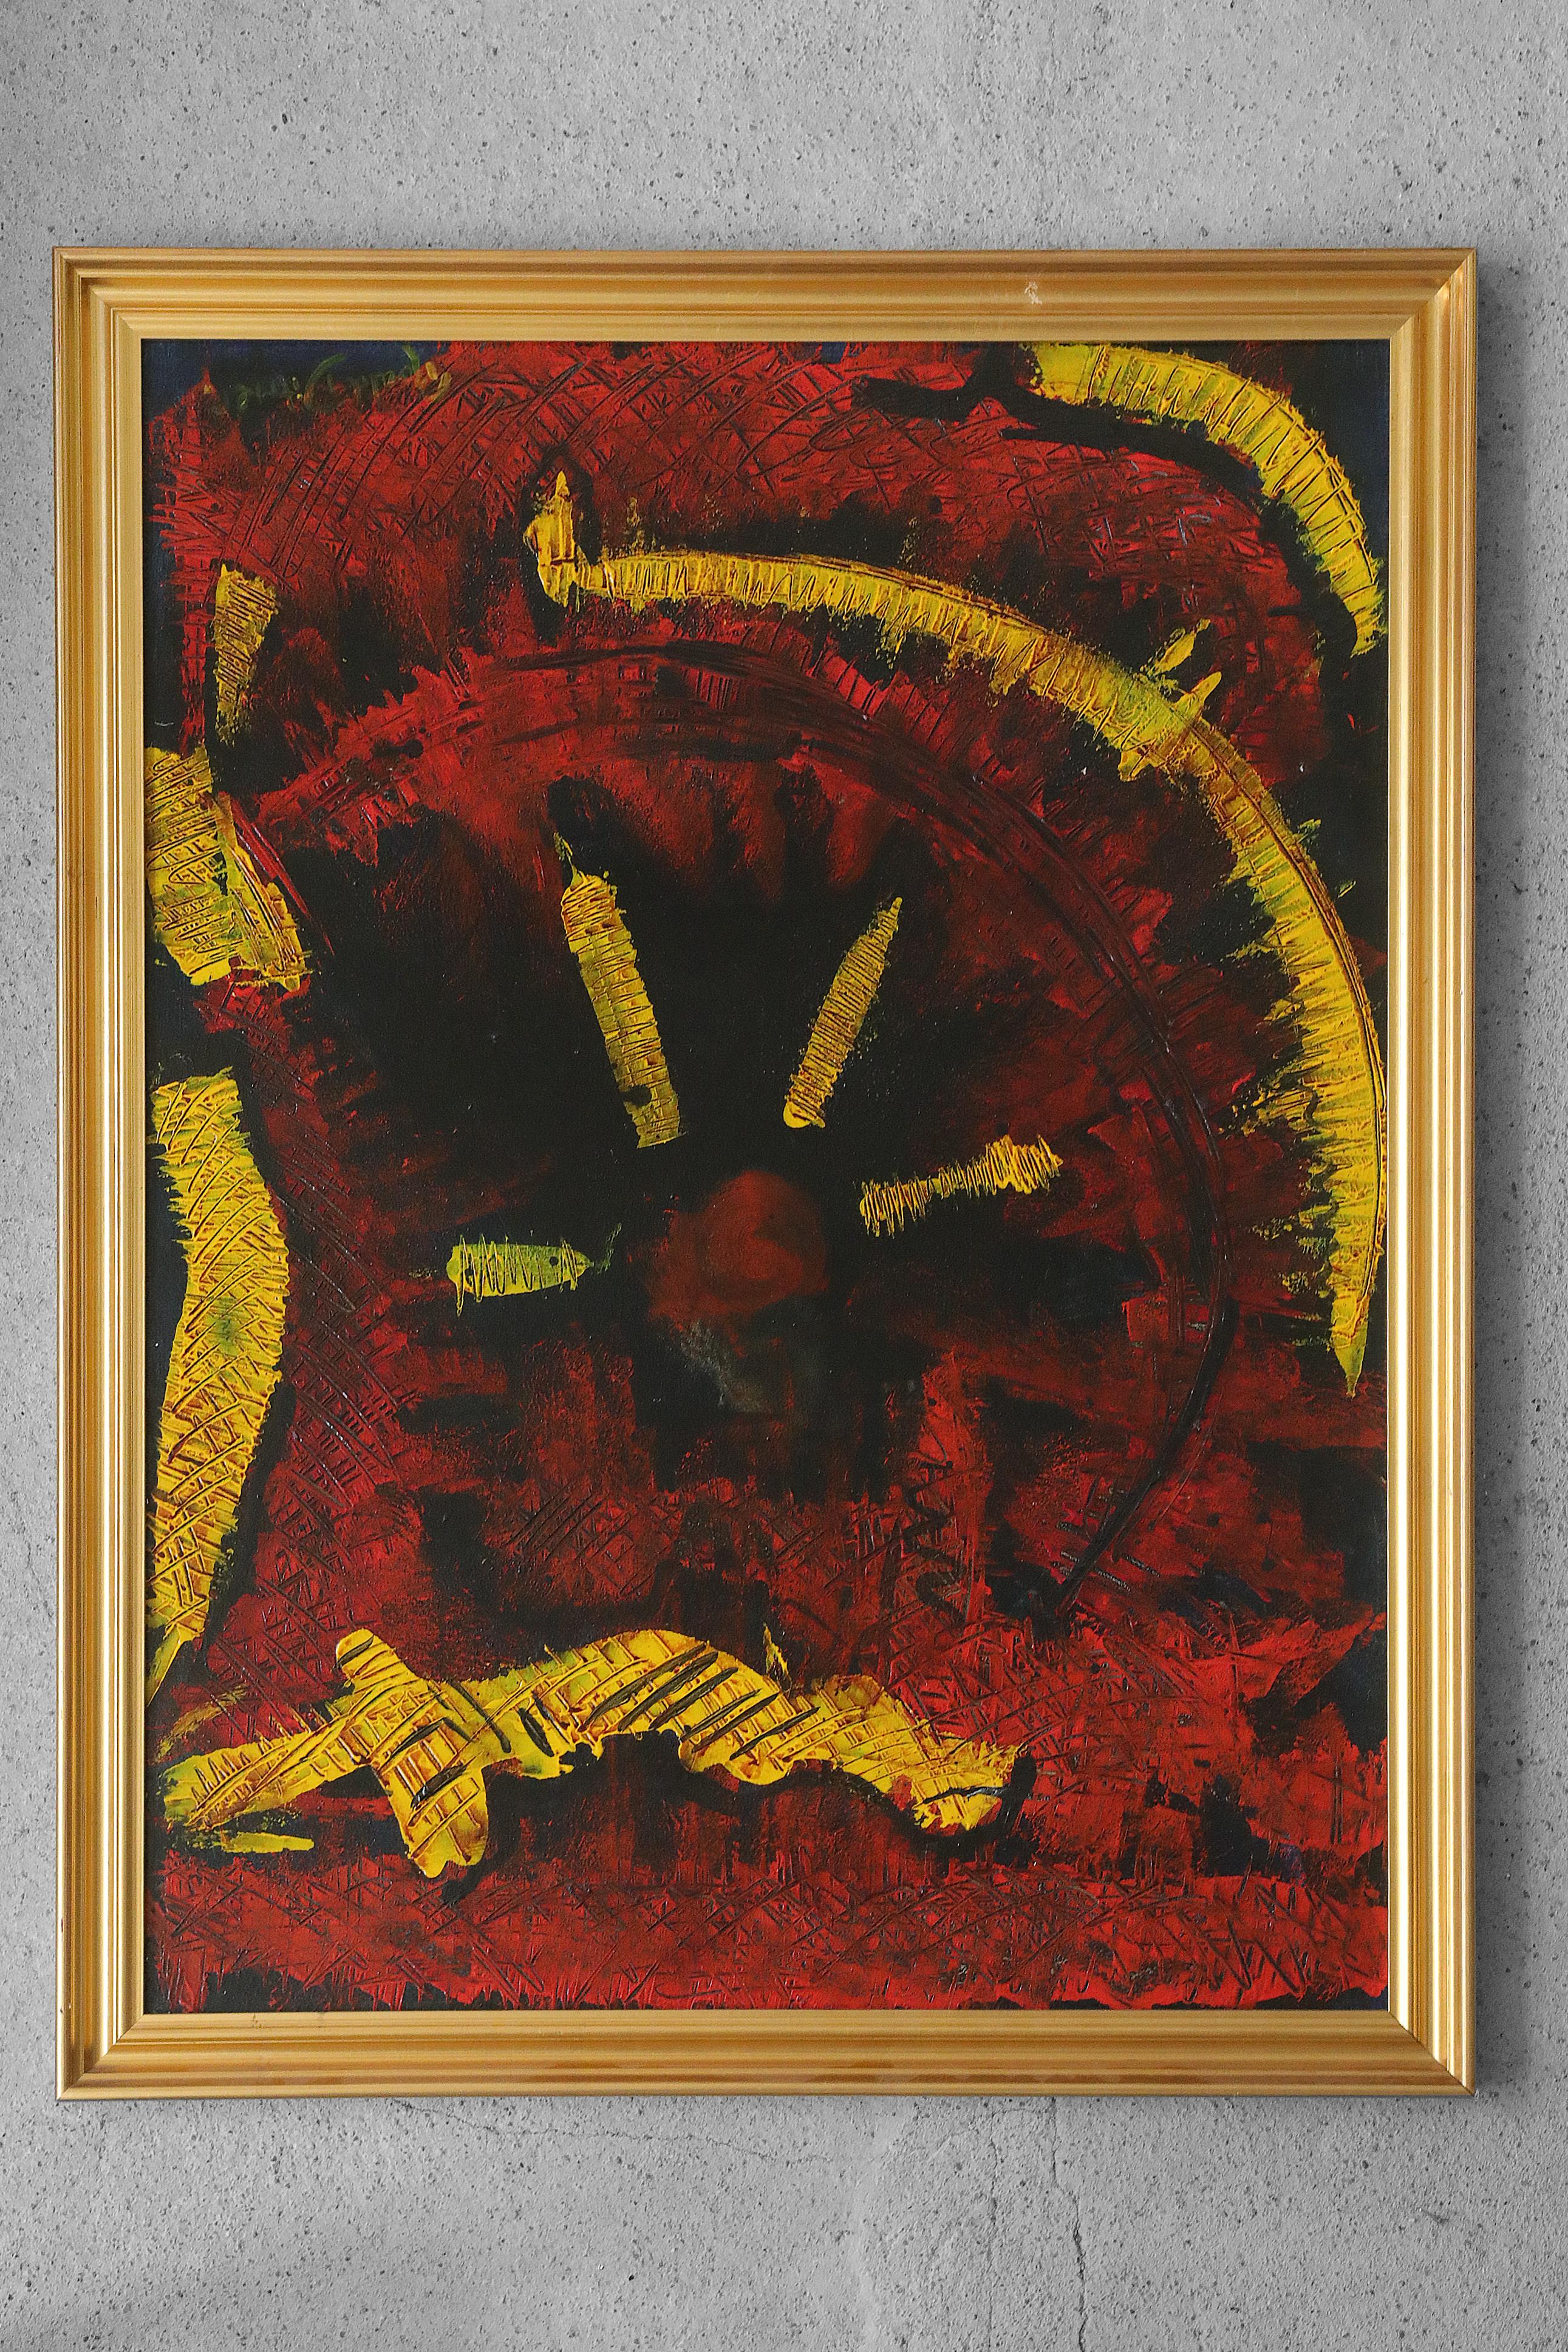 Scandinavian Modern Roald Ditmer, Abstract Composition, Oil on Canvas Paintings, 1999, Framed For Sale